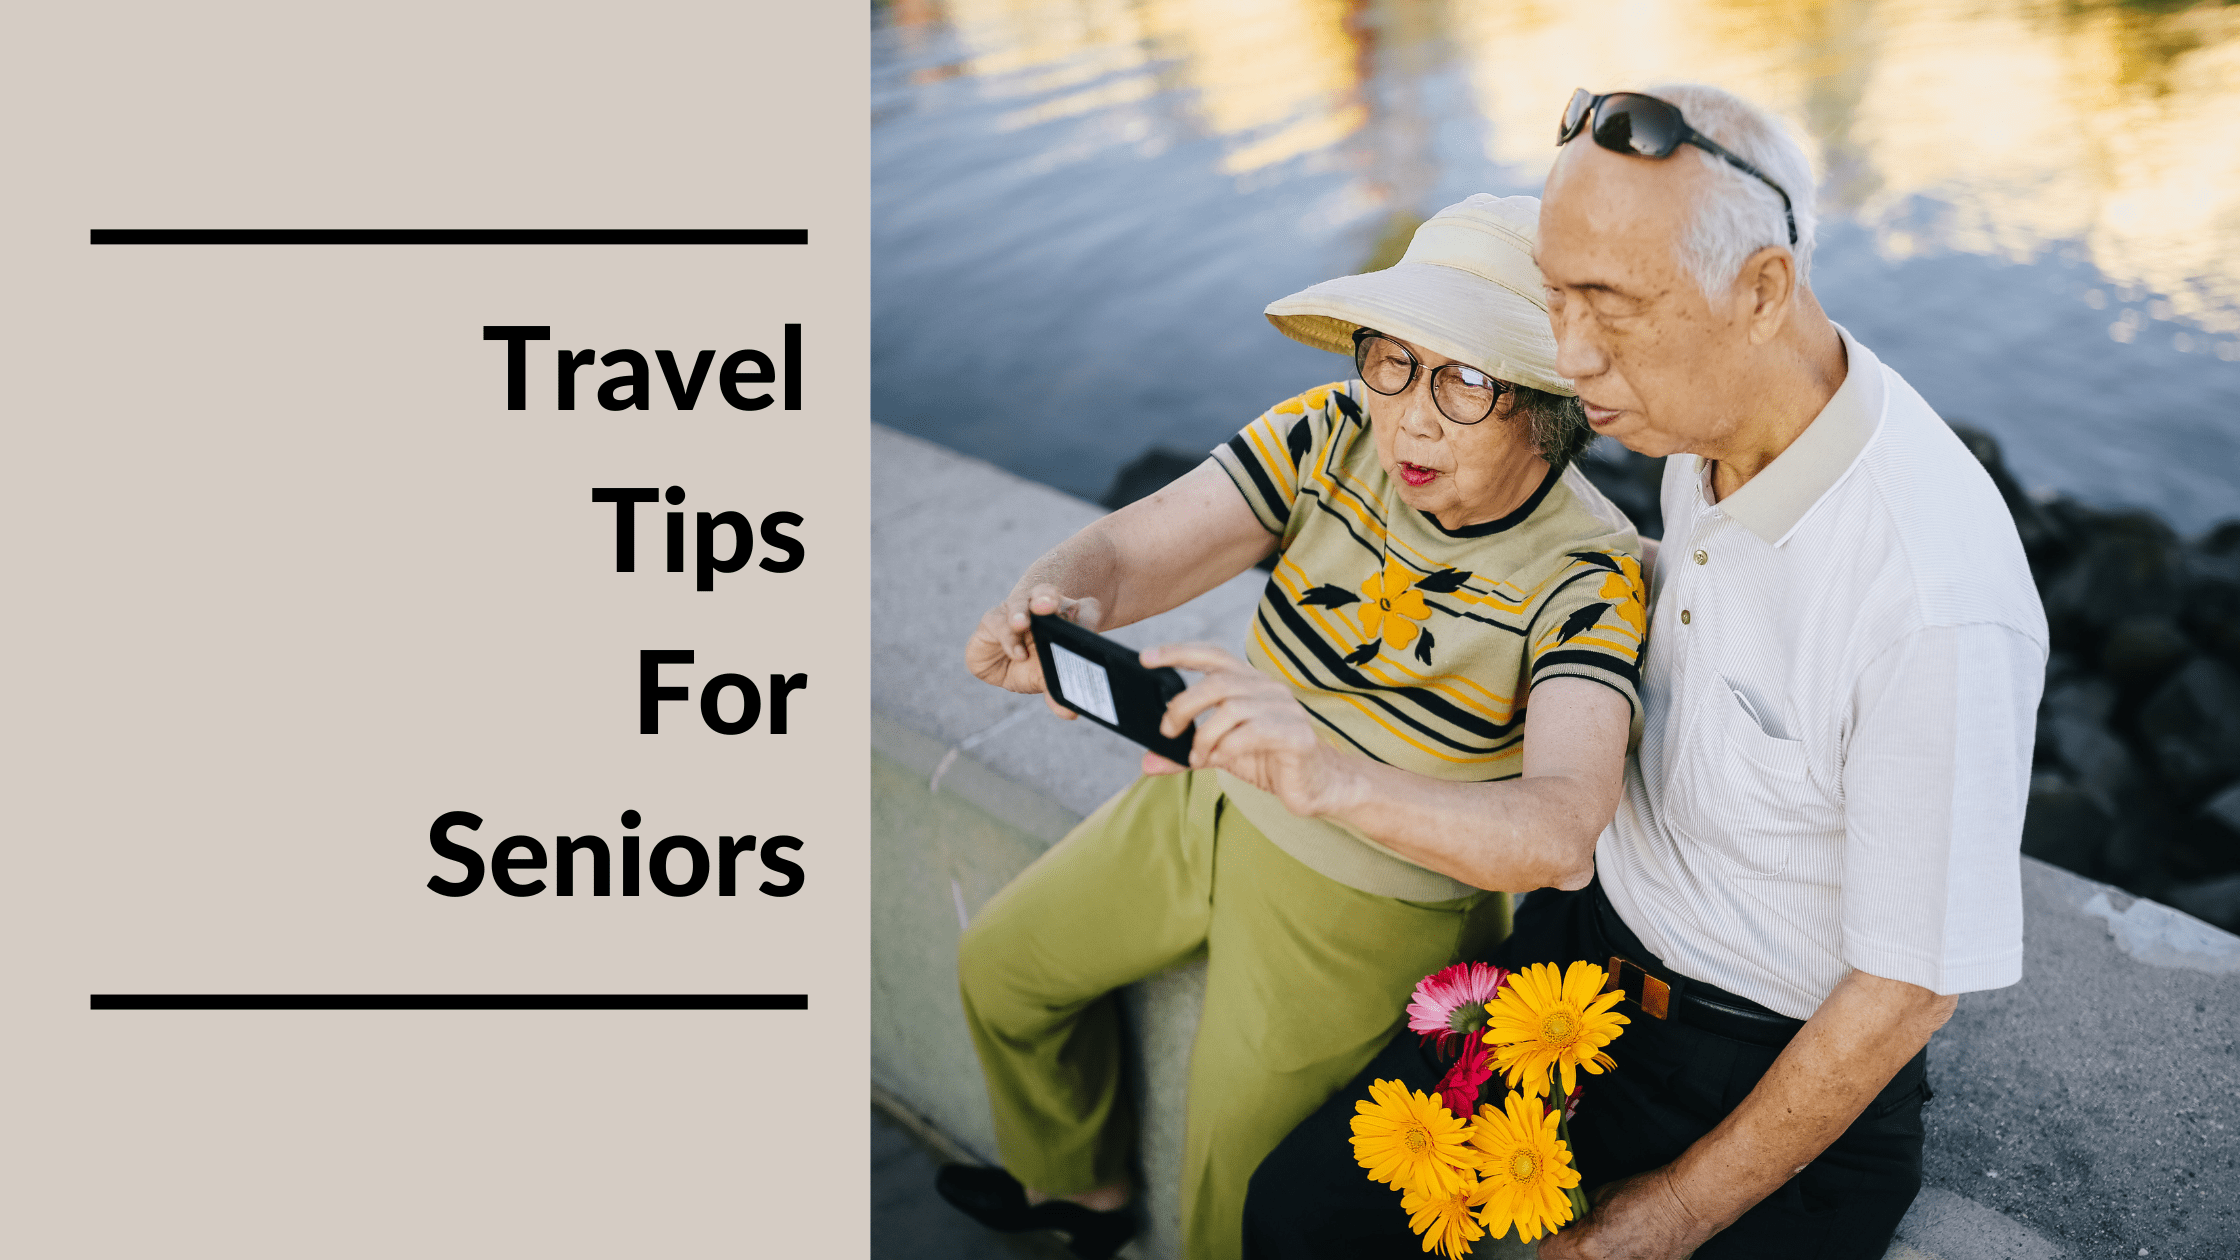 Travel Tips For Seniors Featured Image